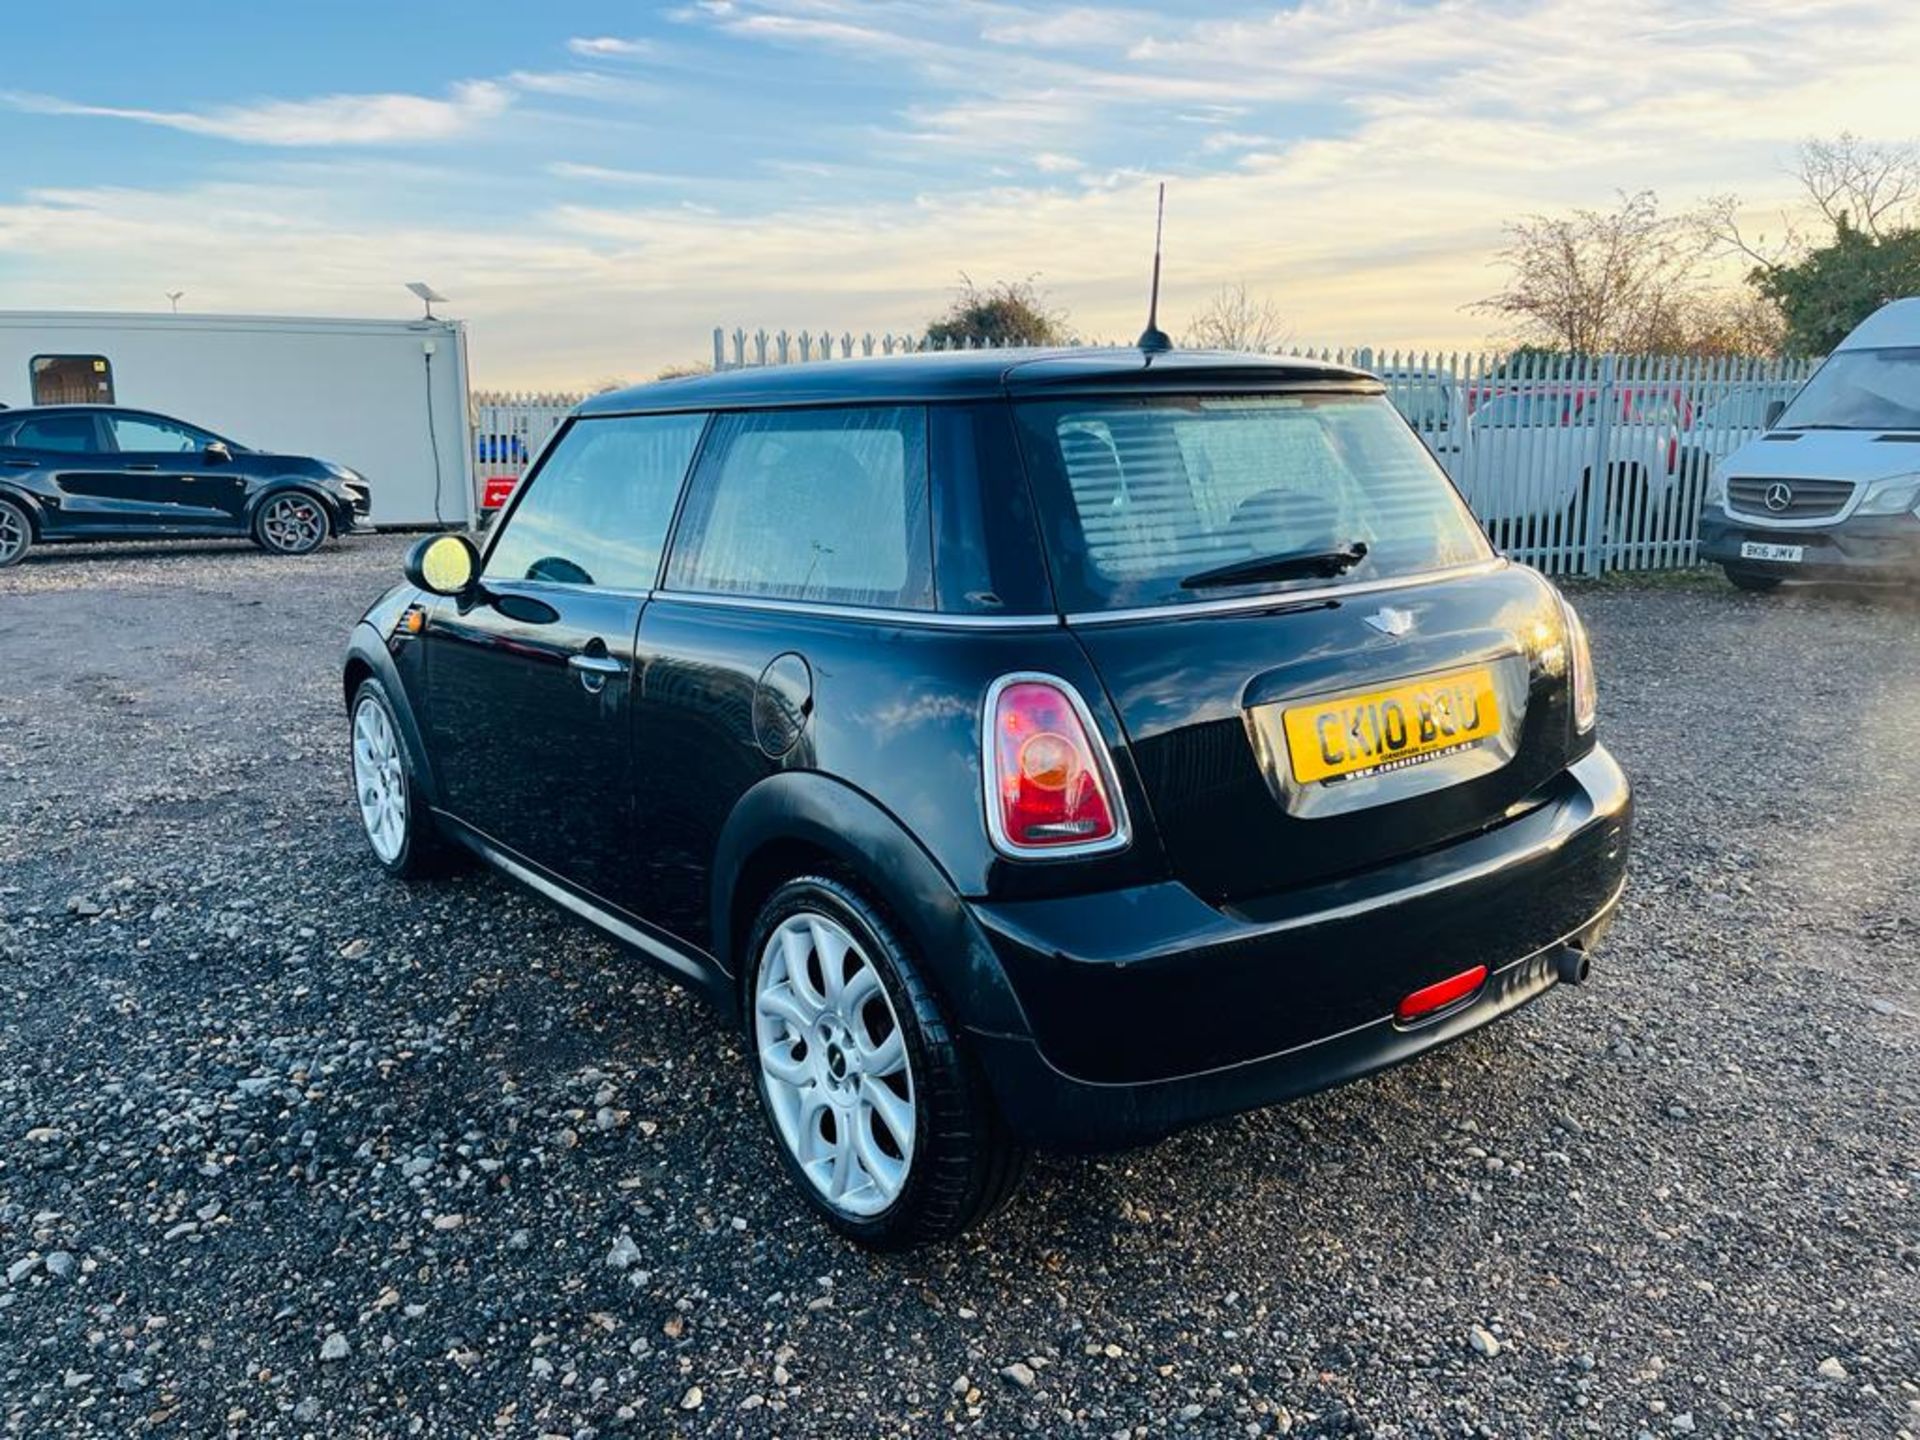 Mini One 1.6 Start/Stop 100 2010 '10 Reg' ' Very Economical' Only 108,430 - Image 5 of 26